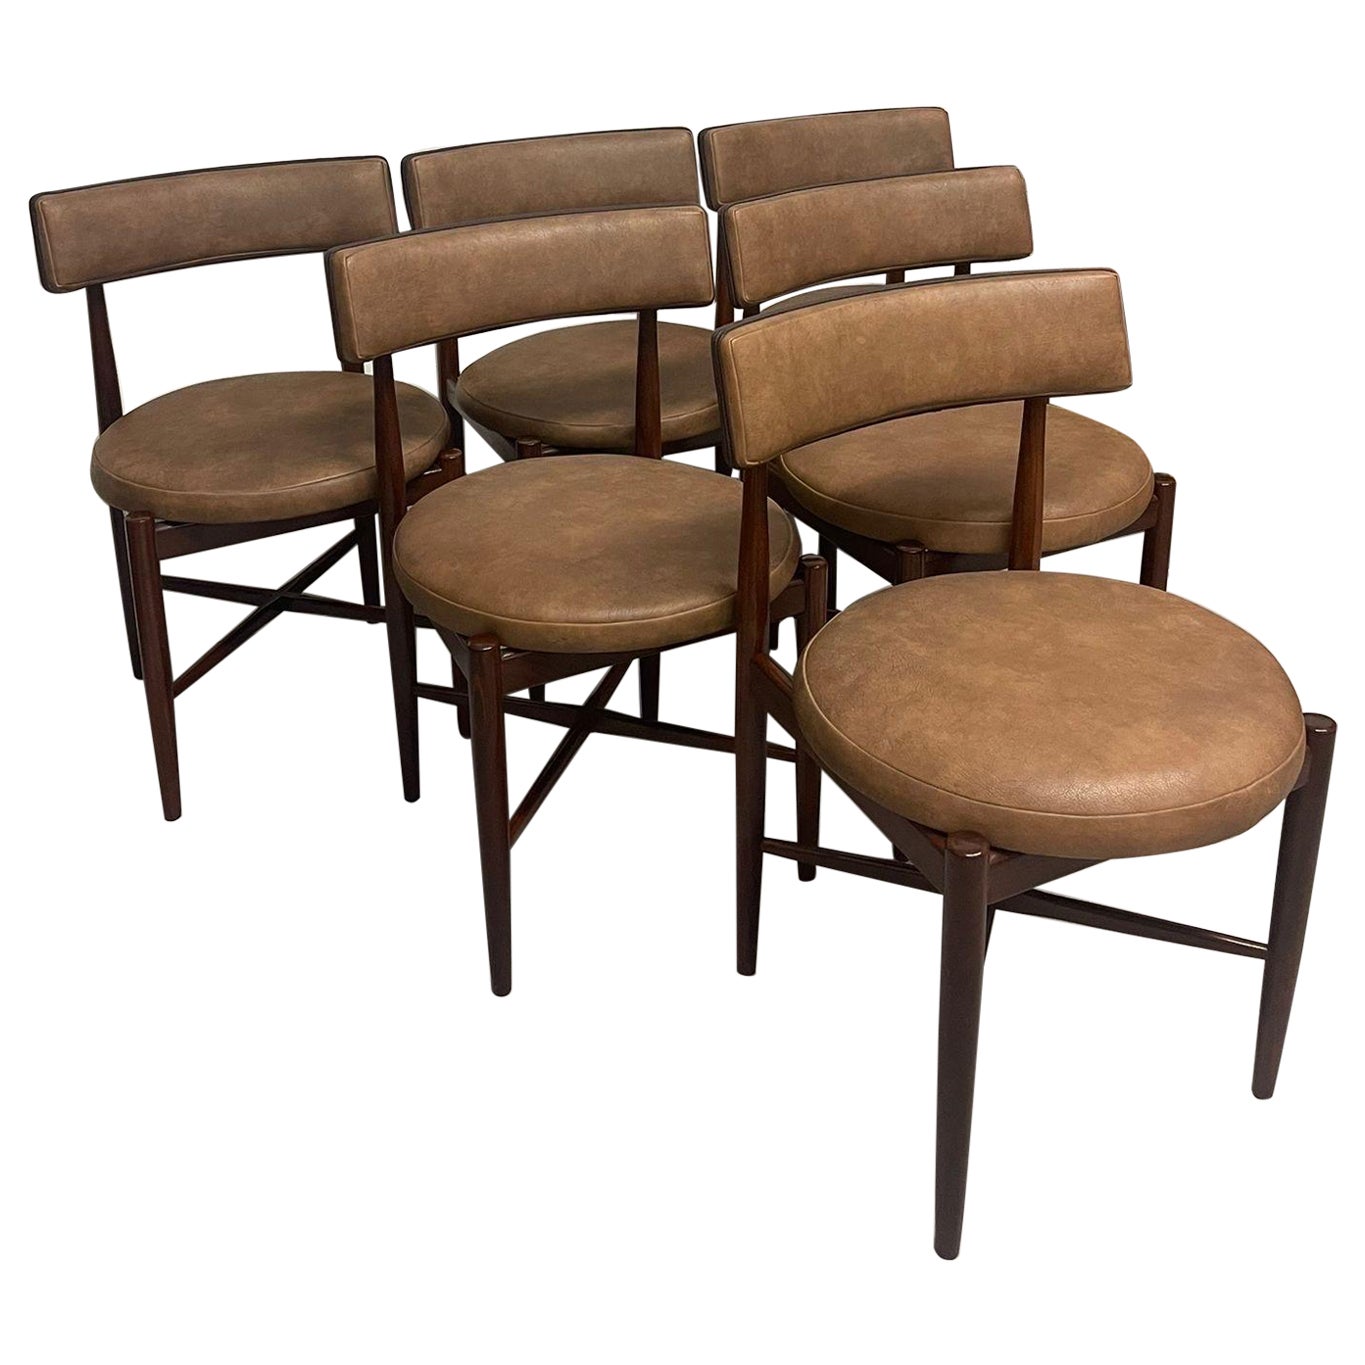 Set of 6 Vintage English Mid Century Modern G-Plan Dining Chairs. For Sale